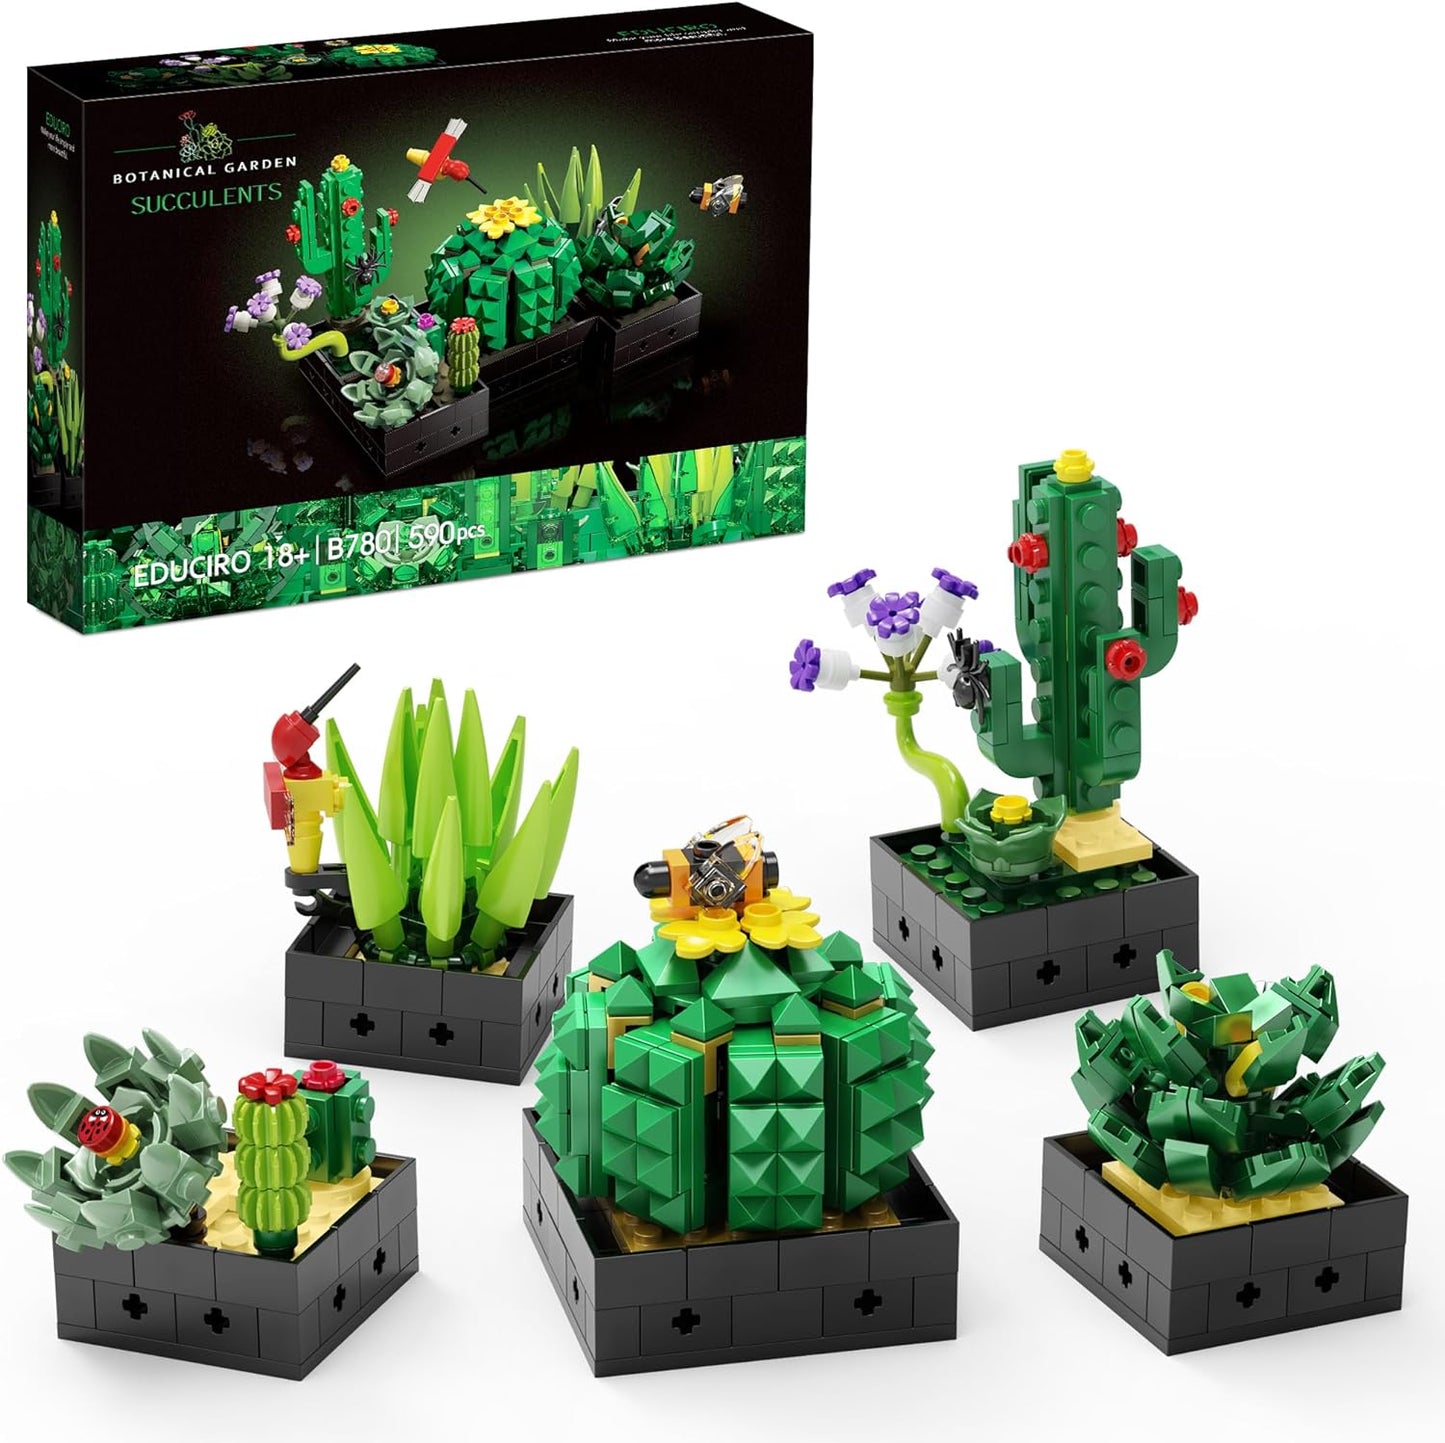 Succulents Plants Building Set for Adults - 5 Pack (590 Pieces), Valentines Day Gifts for Kids, Women,Her and Him, Botanical Collection Home Decor